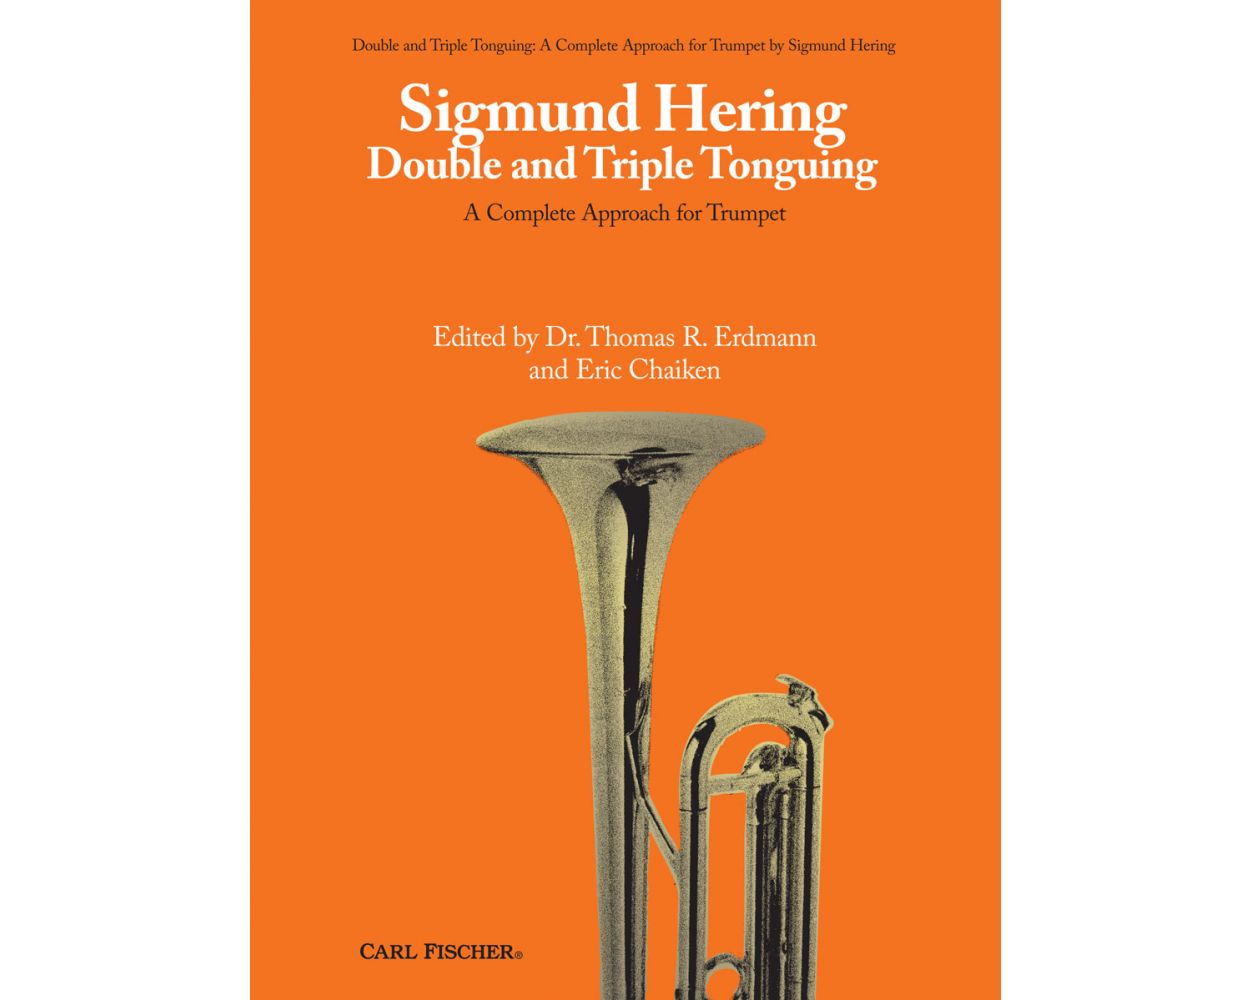 Hering Double and Triple Tonguing A Complete Approach for Trumpet